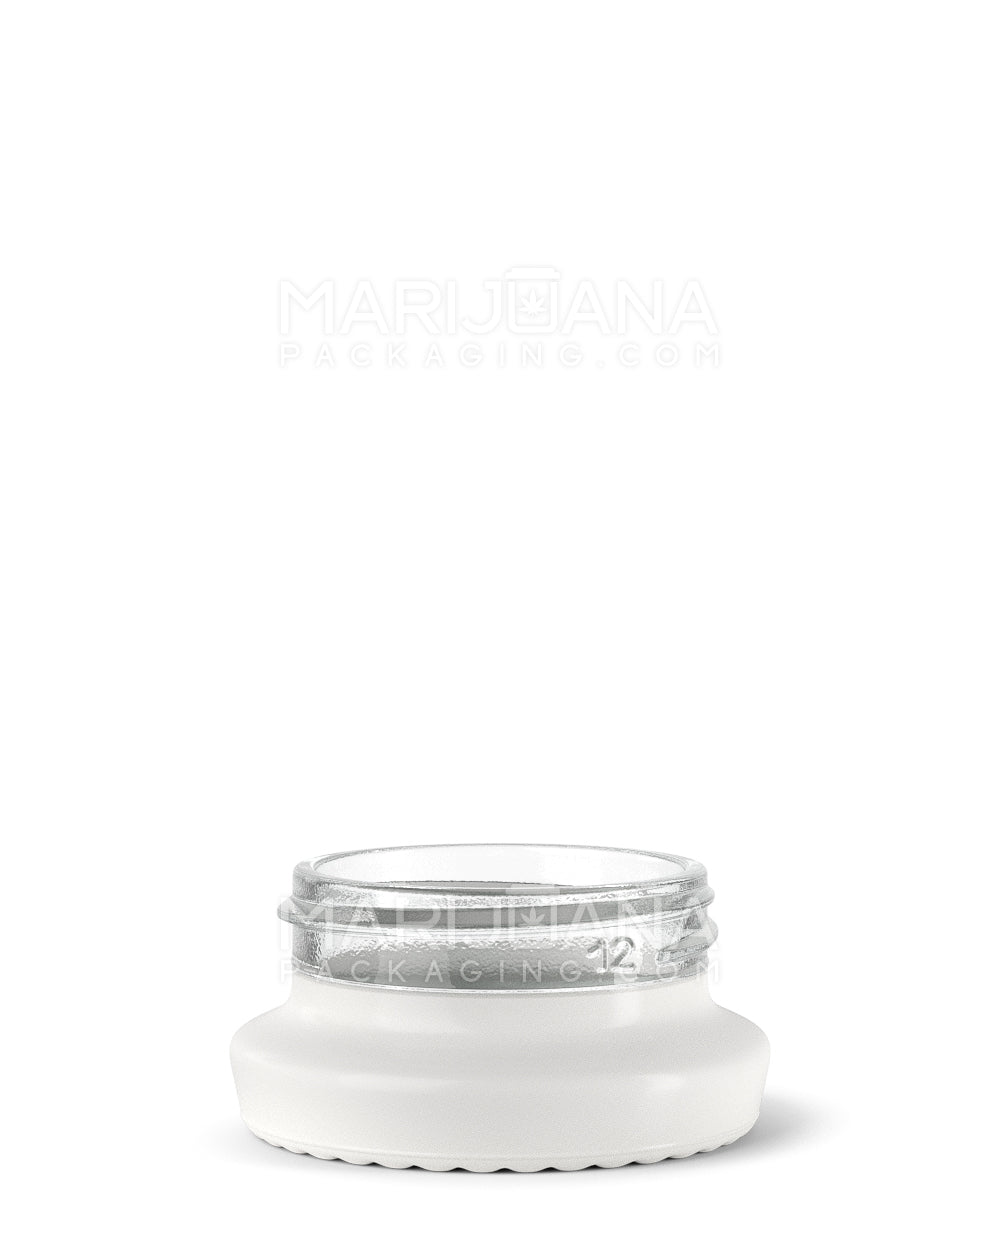 White Glass Concentrate Containers | 38mm - 9mL - 240 Count